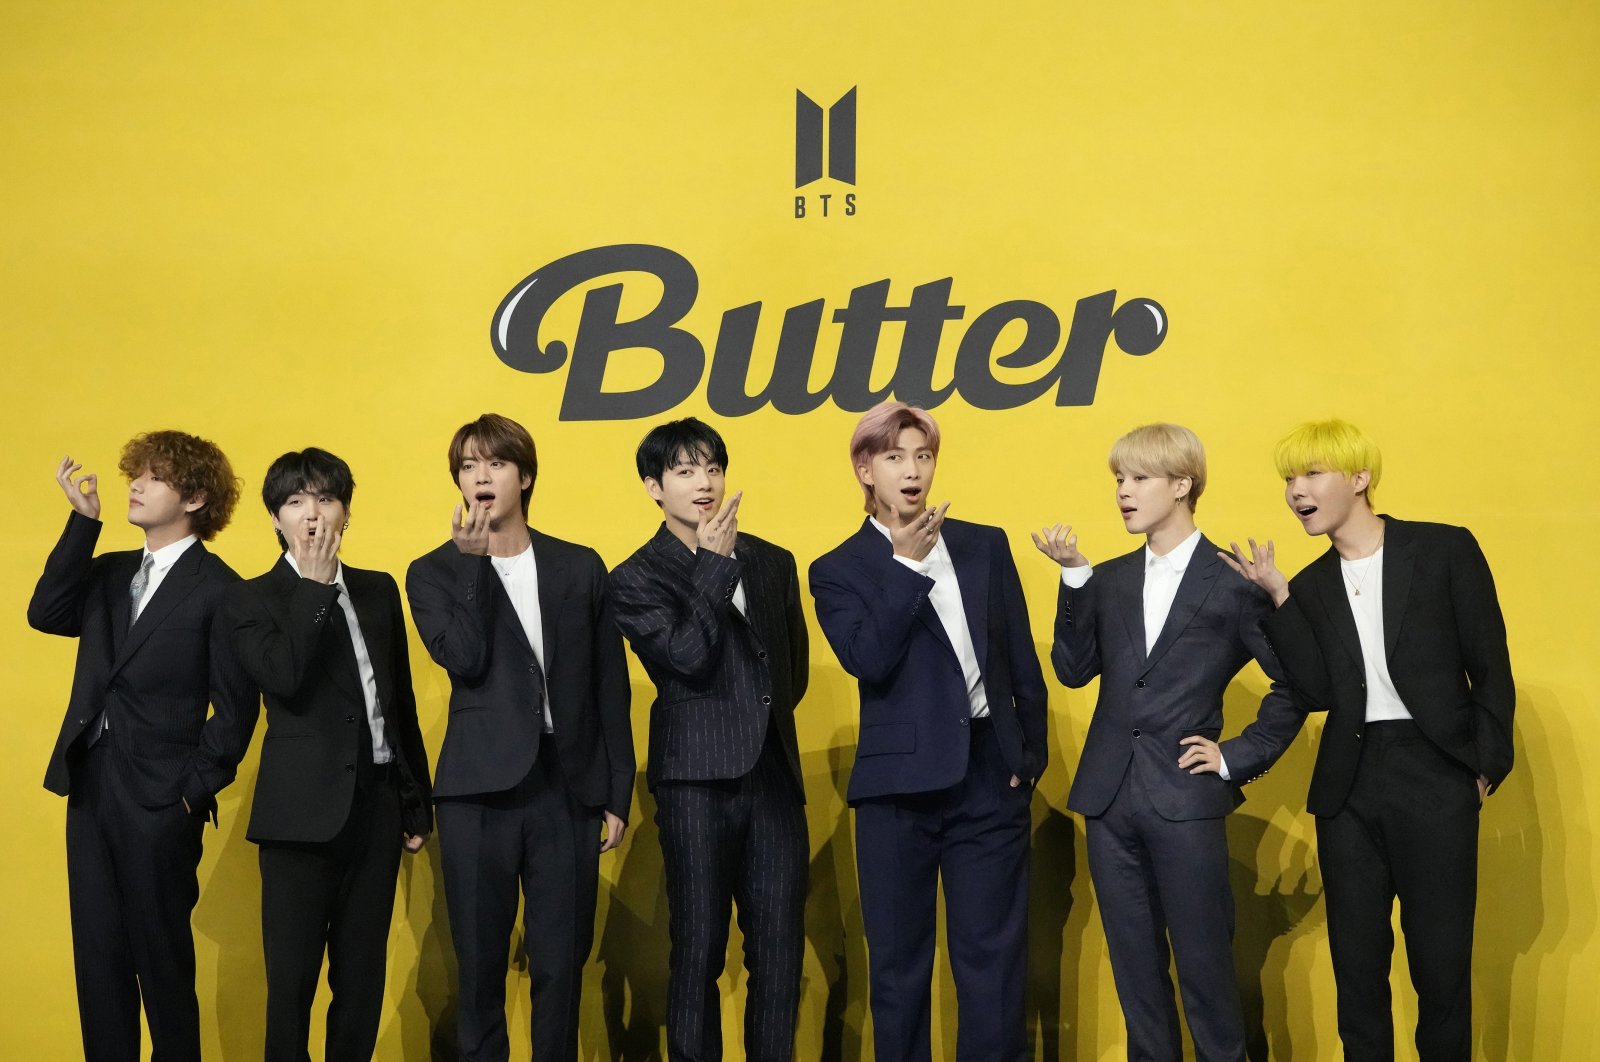 Members of South Korean K-pop band BTS pose for photographers ahead of a press conference to introduce their single &quot;Butter&quot; in Seoul, South Korea, May 21, 2021. (Reuters Photo)